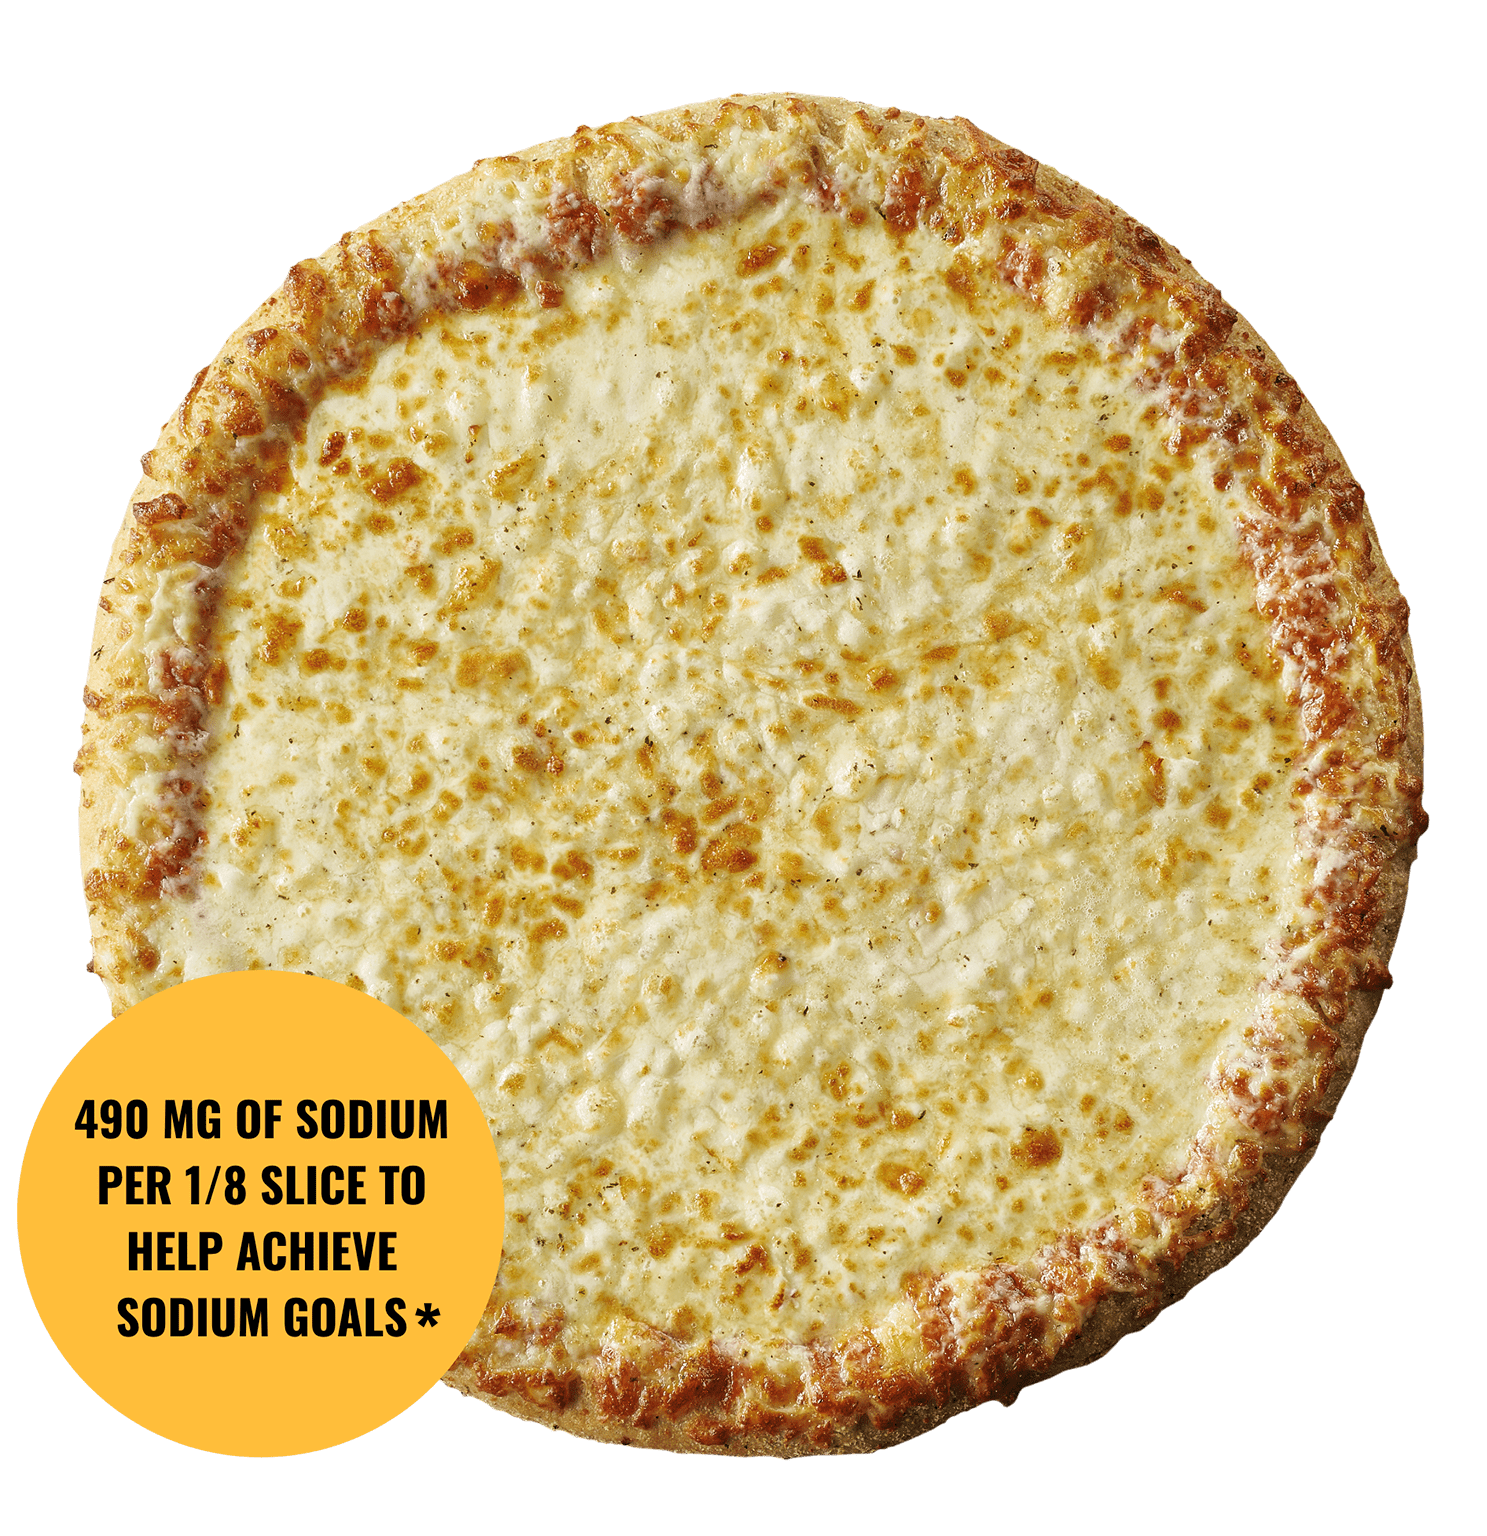 Overhead photo of a cheese pizza with text that reads 490mg of sodium per 1/8 slice to help achieve sodium goals